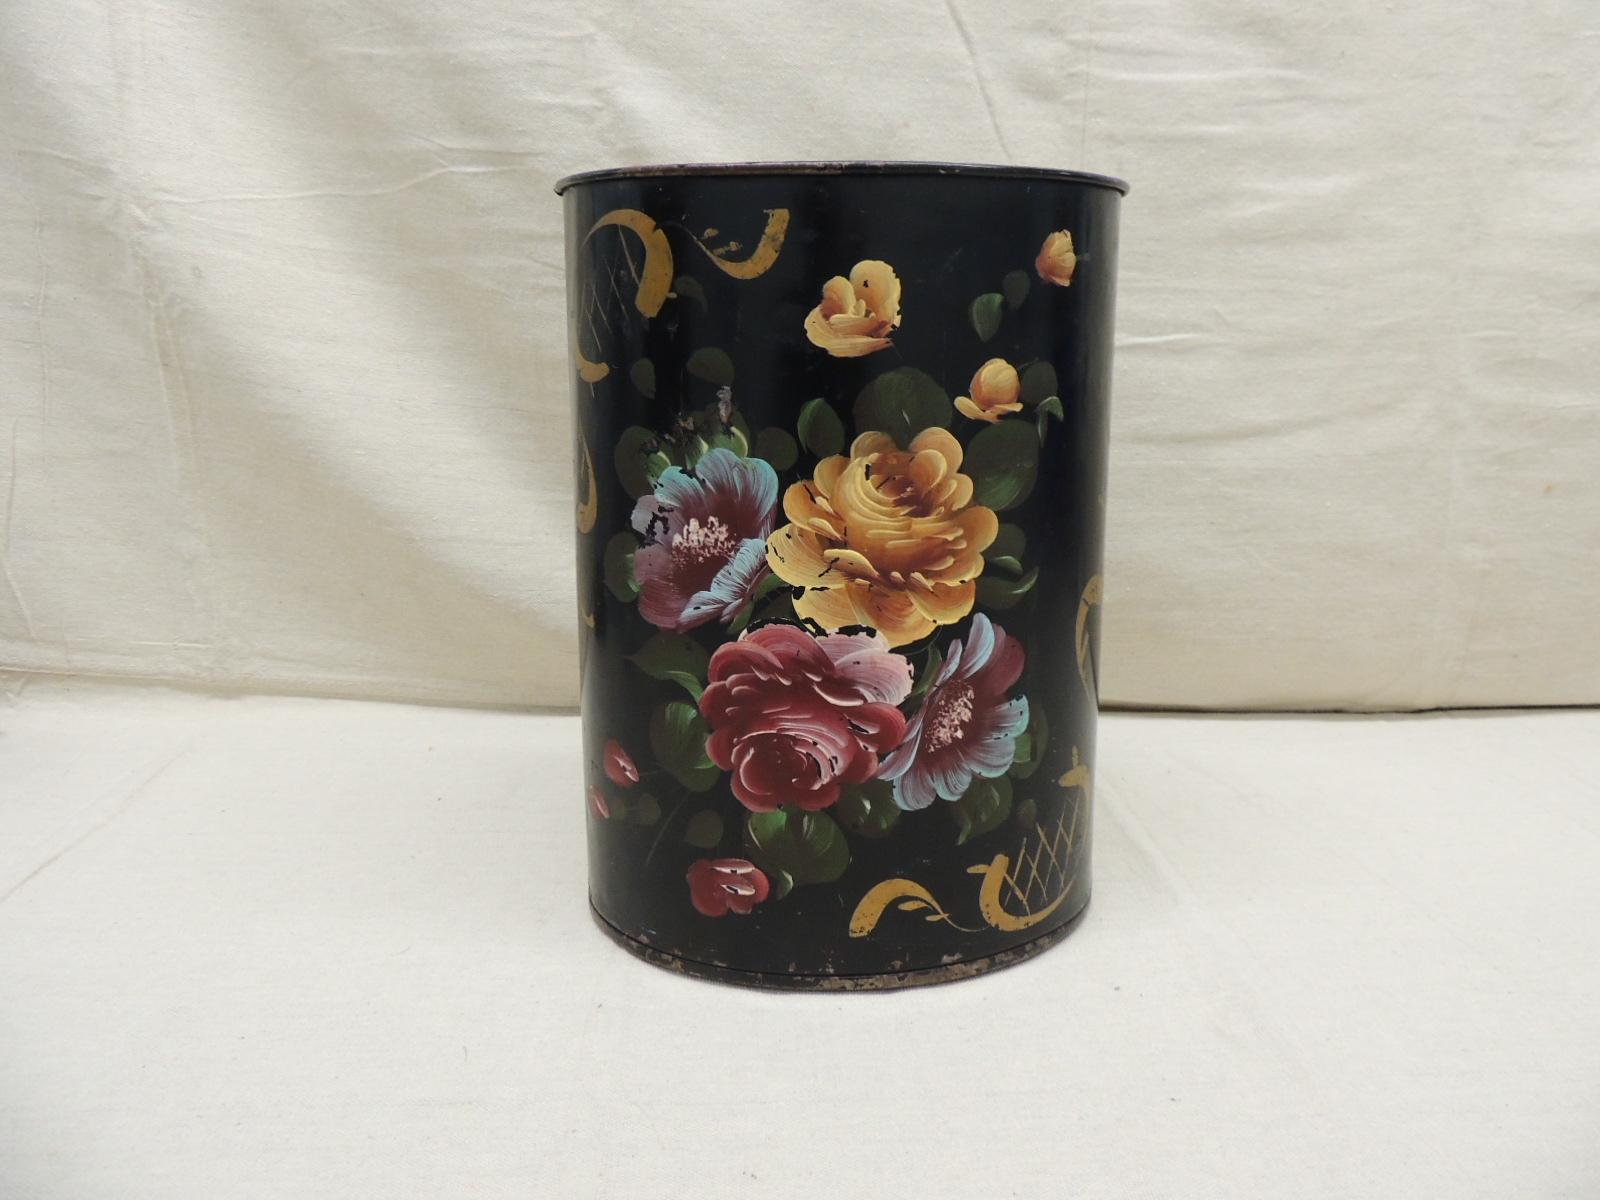 Vintage Hand-painted tole wastebasket
Floral pattern garbage can depicting flowers in bloom.
In shades of black, gold, burgundy, green and blue
Size: 10